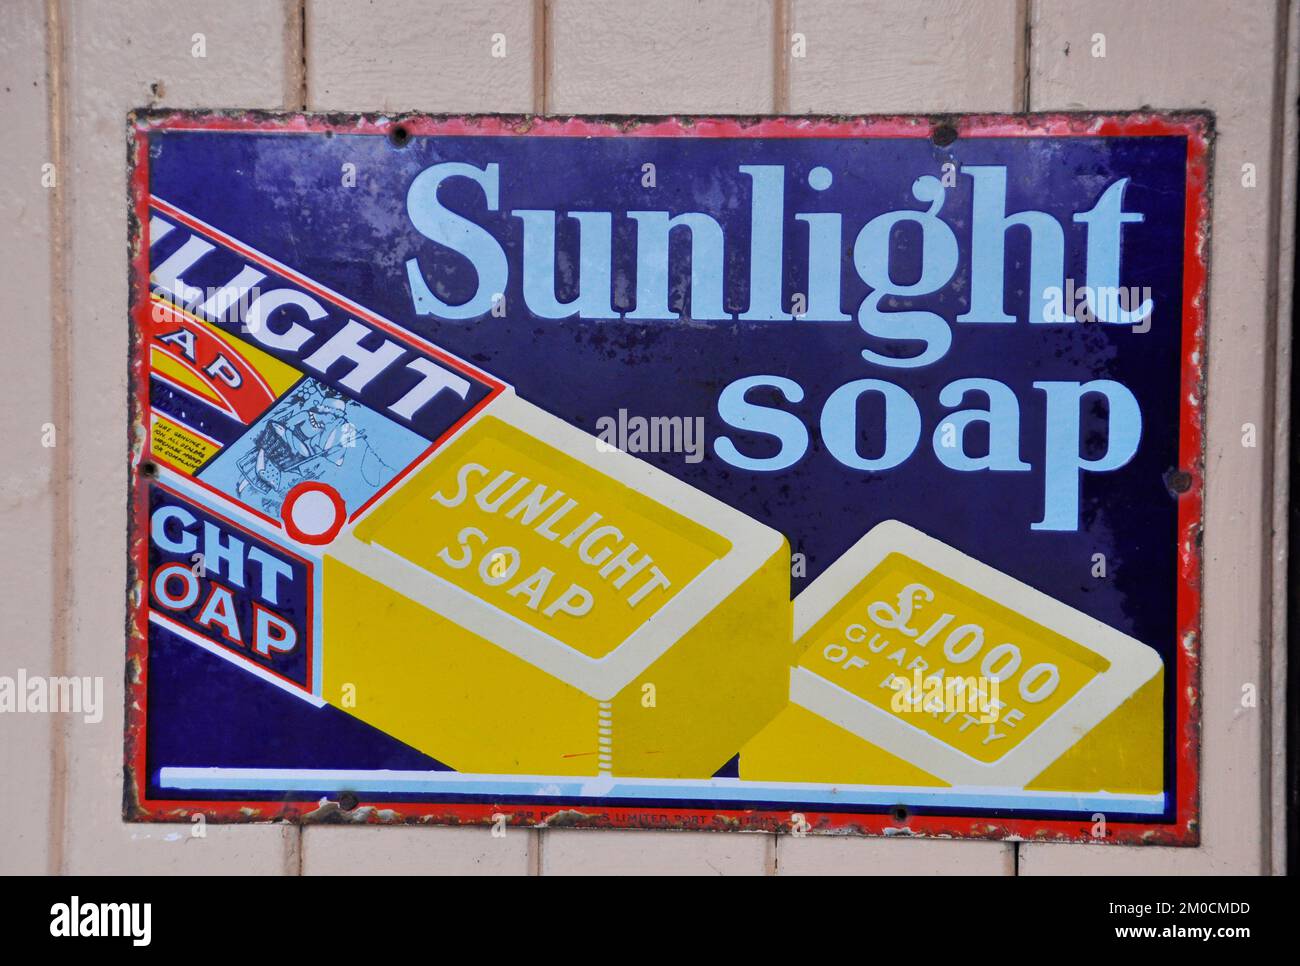 Enamelled metal sign, advertising Sunlight Soap photographed at Tenterden railway station in Kent,England, UK Stock Photo